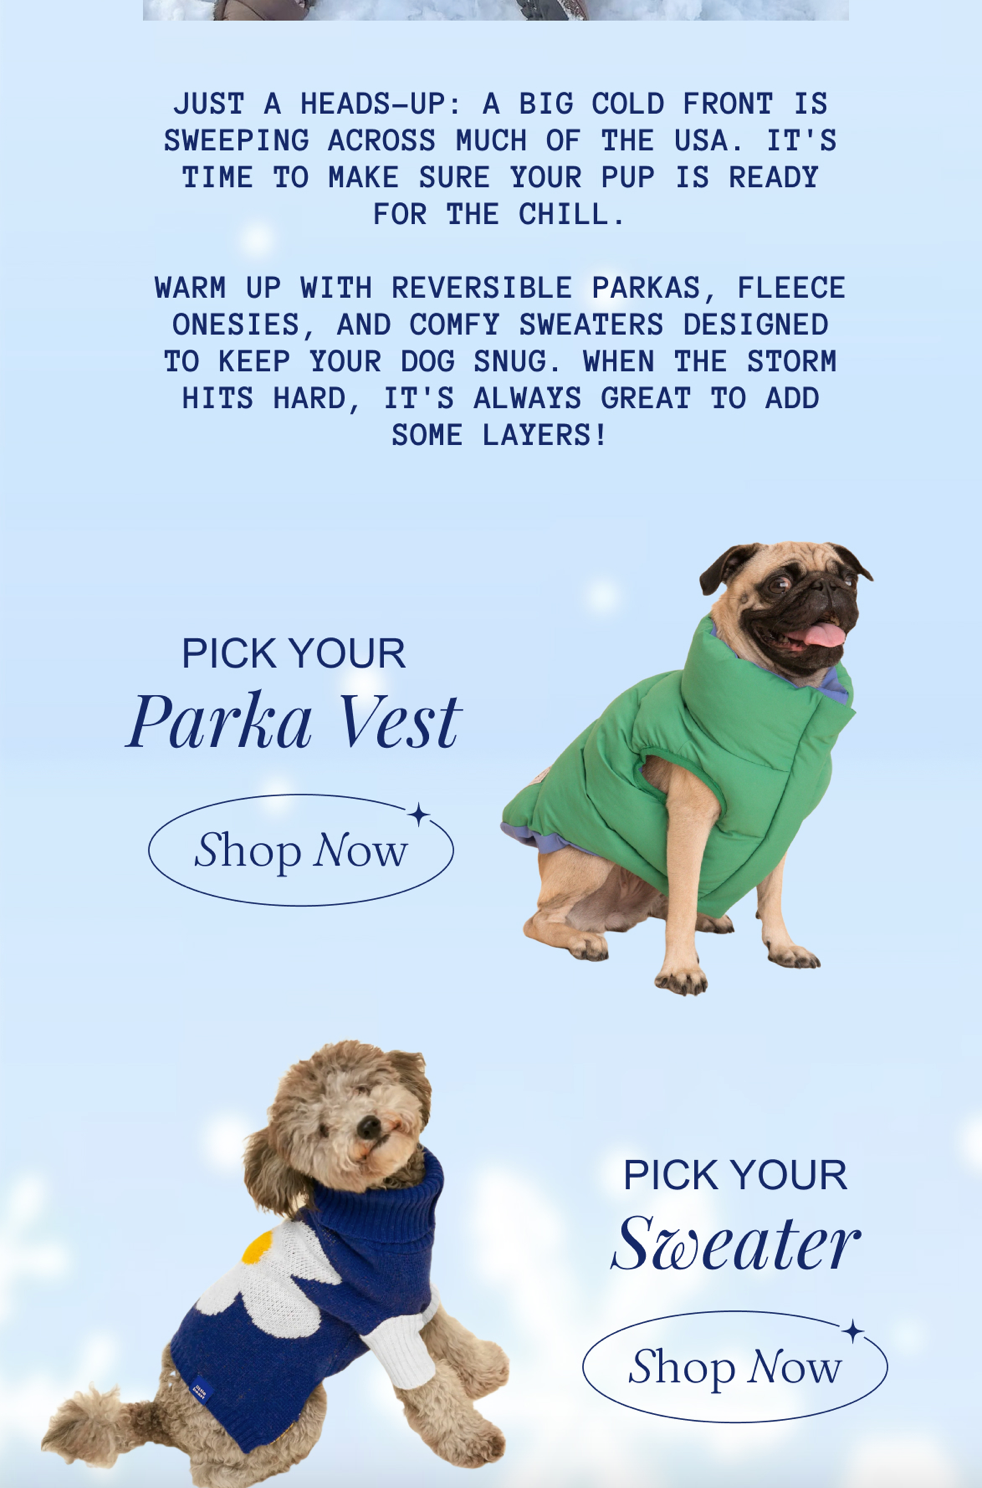 Little Beast's email includes pictures of dogs wearing the brand's clothing, with purchase links. Second Panel